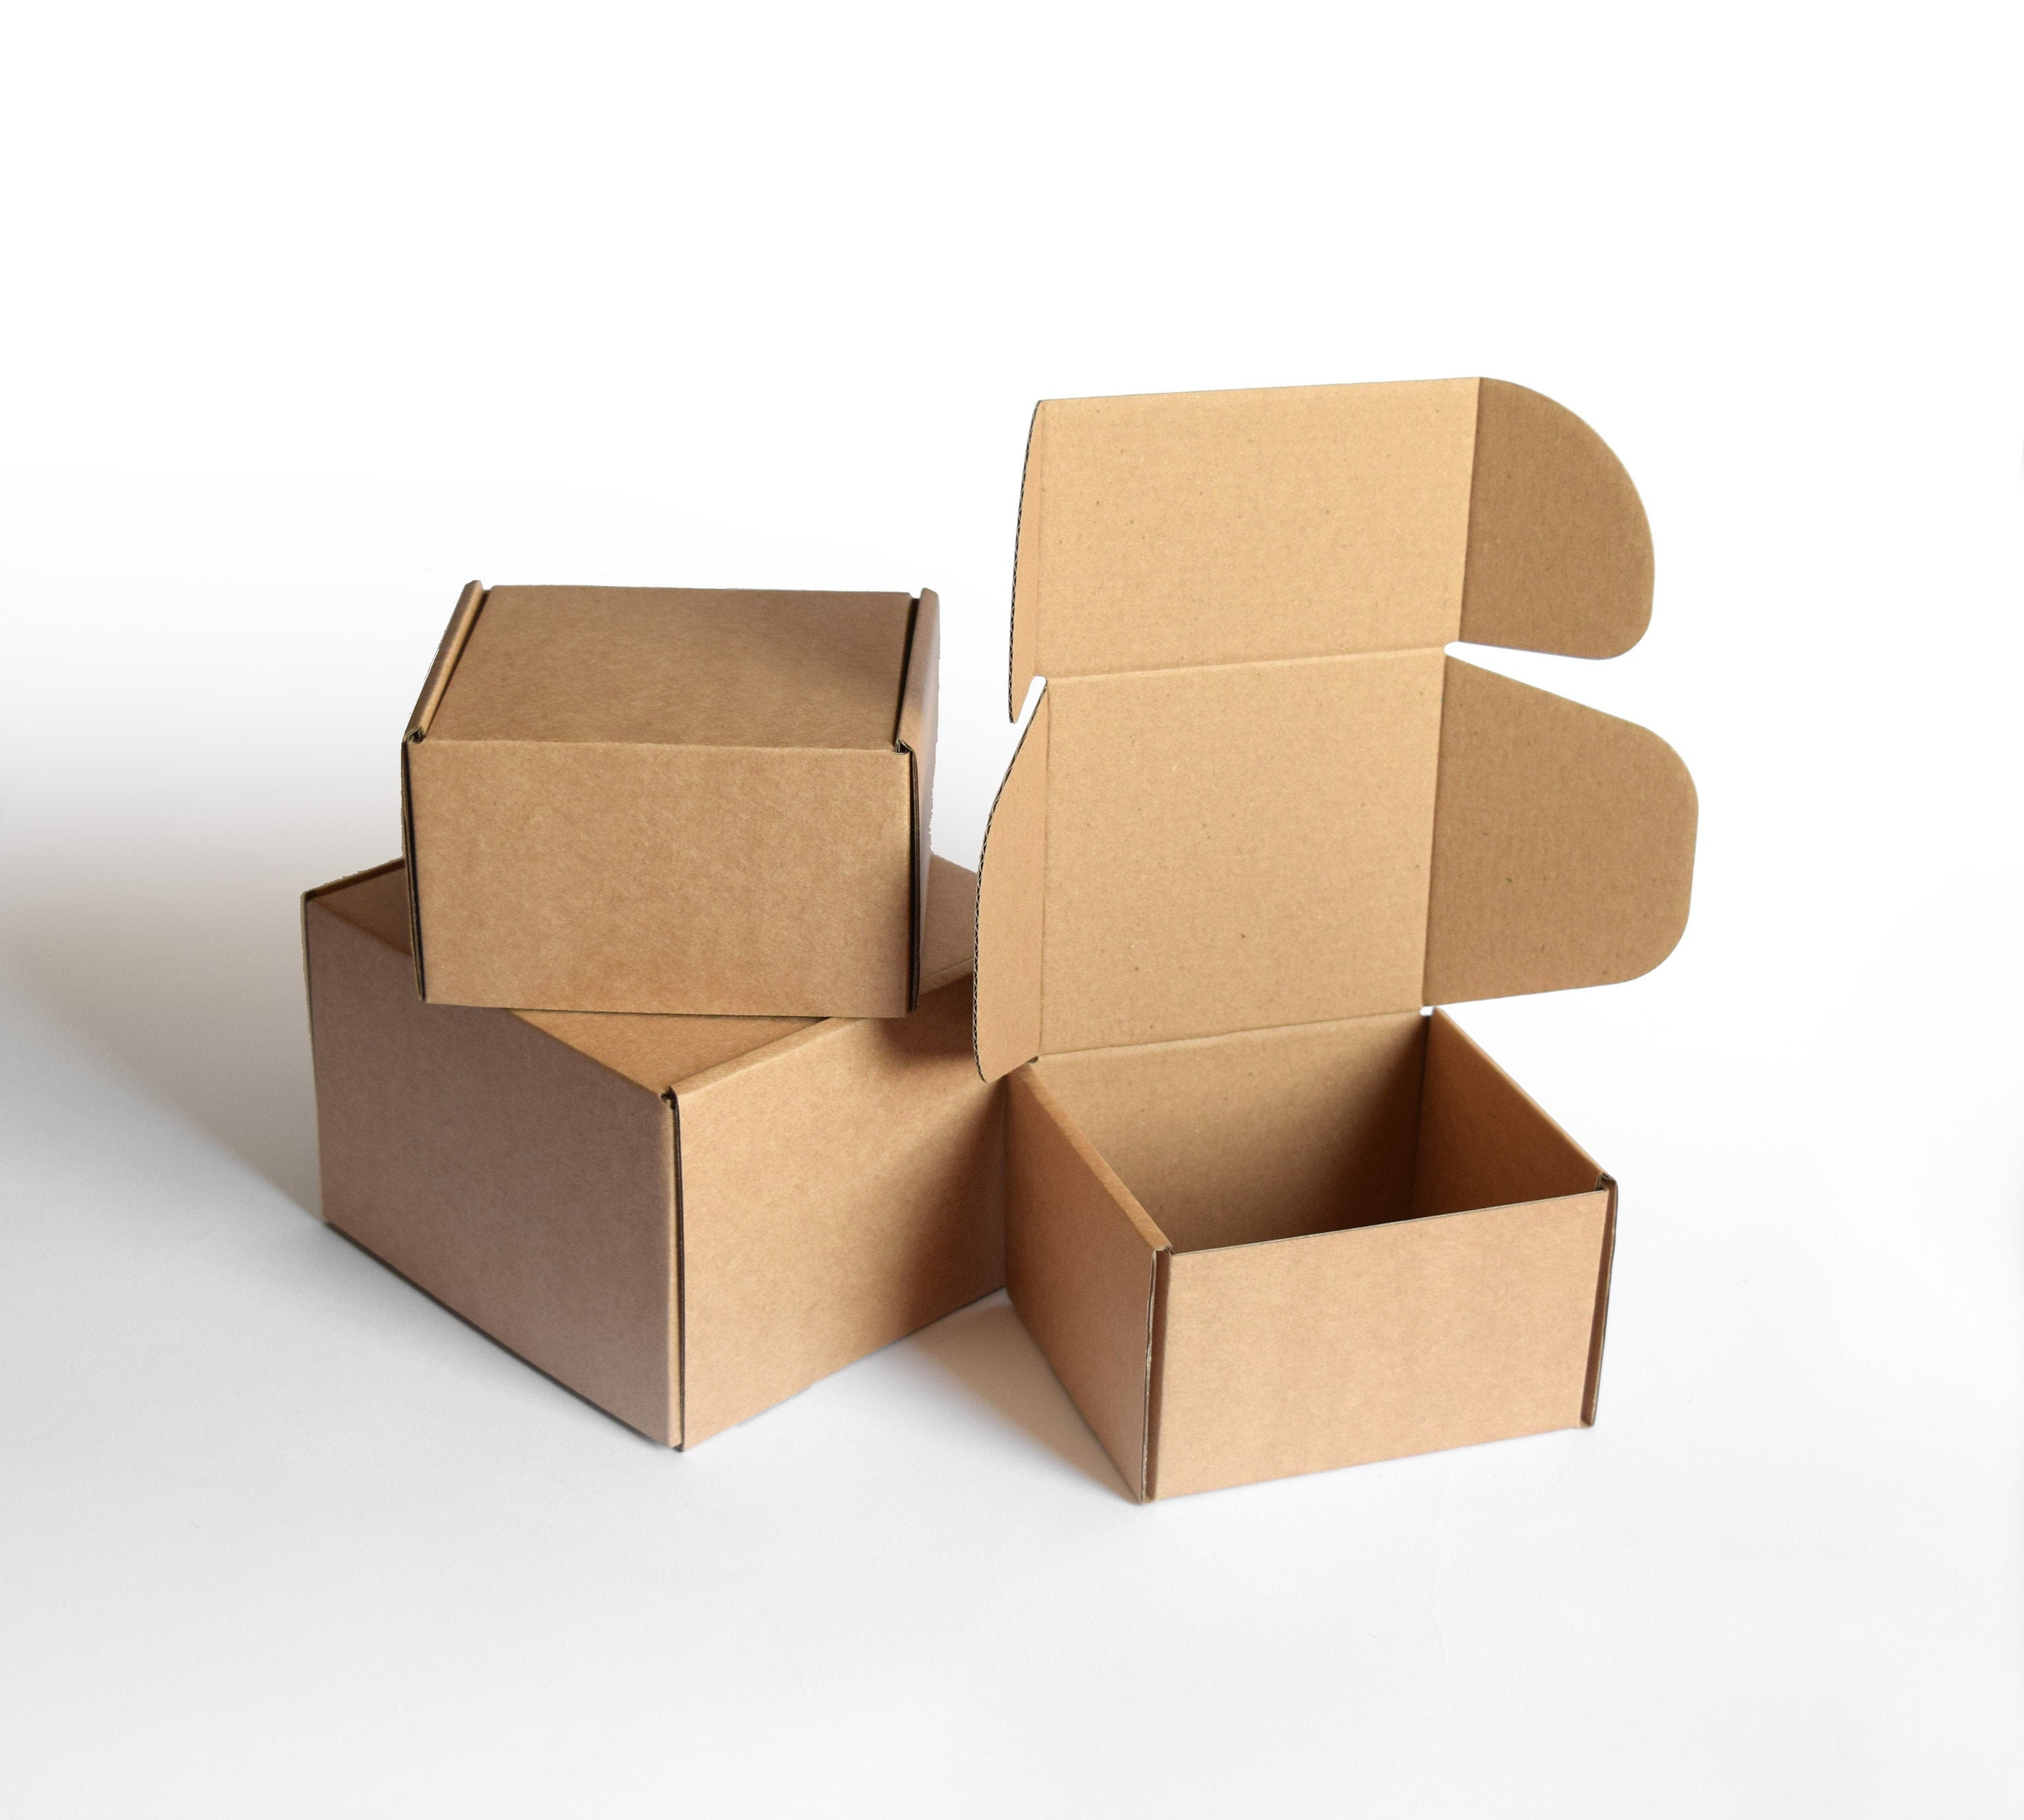 Shipping Supplies: Boxes, Peanuts, Mailers & More